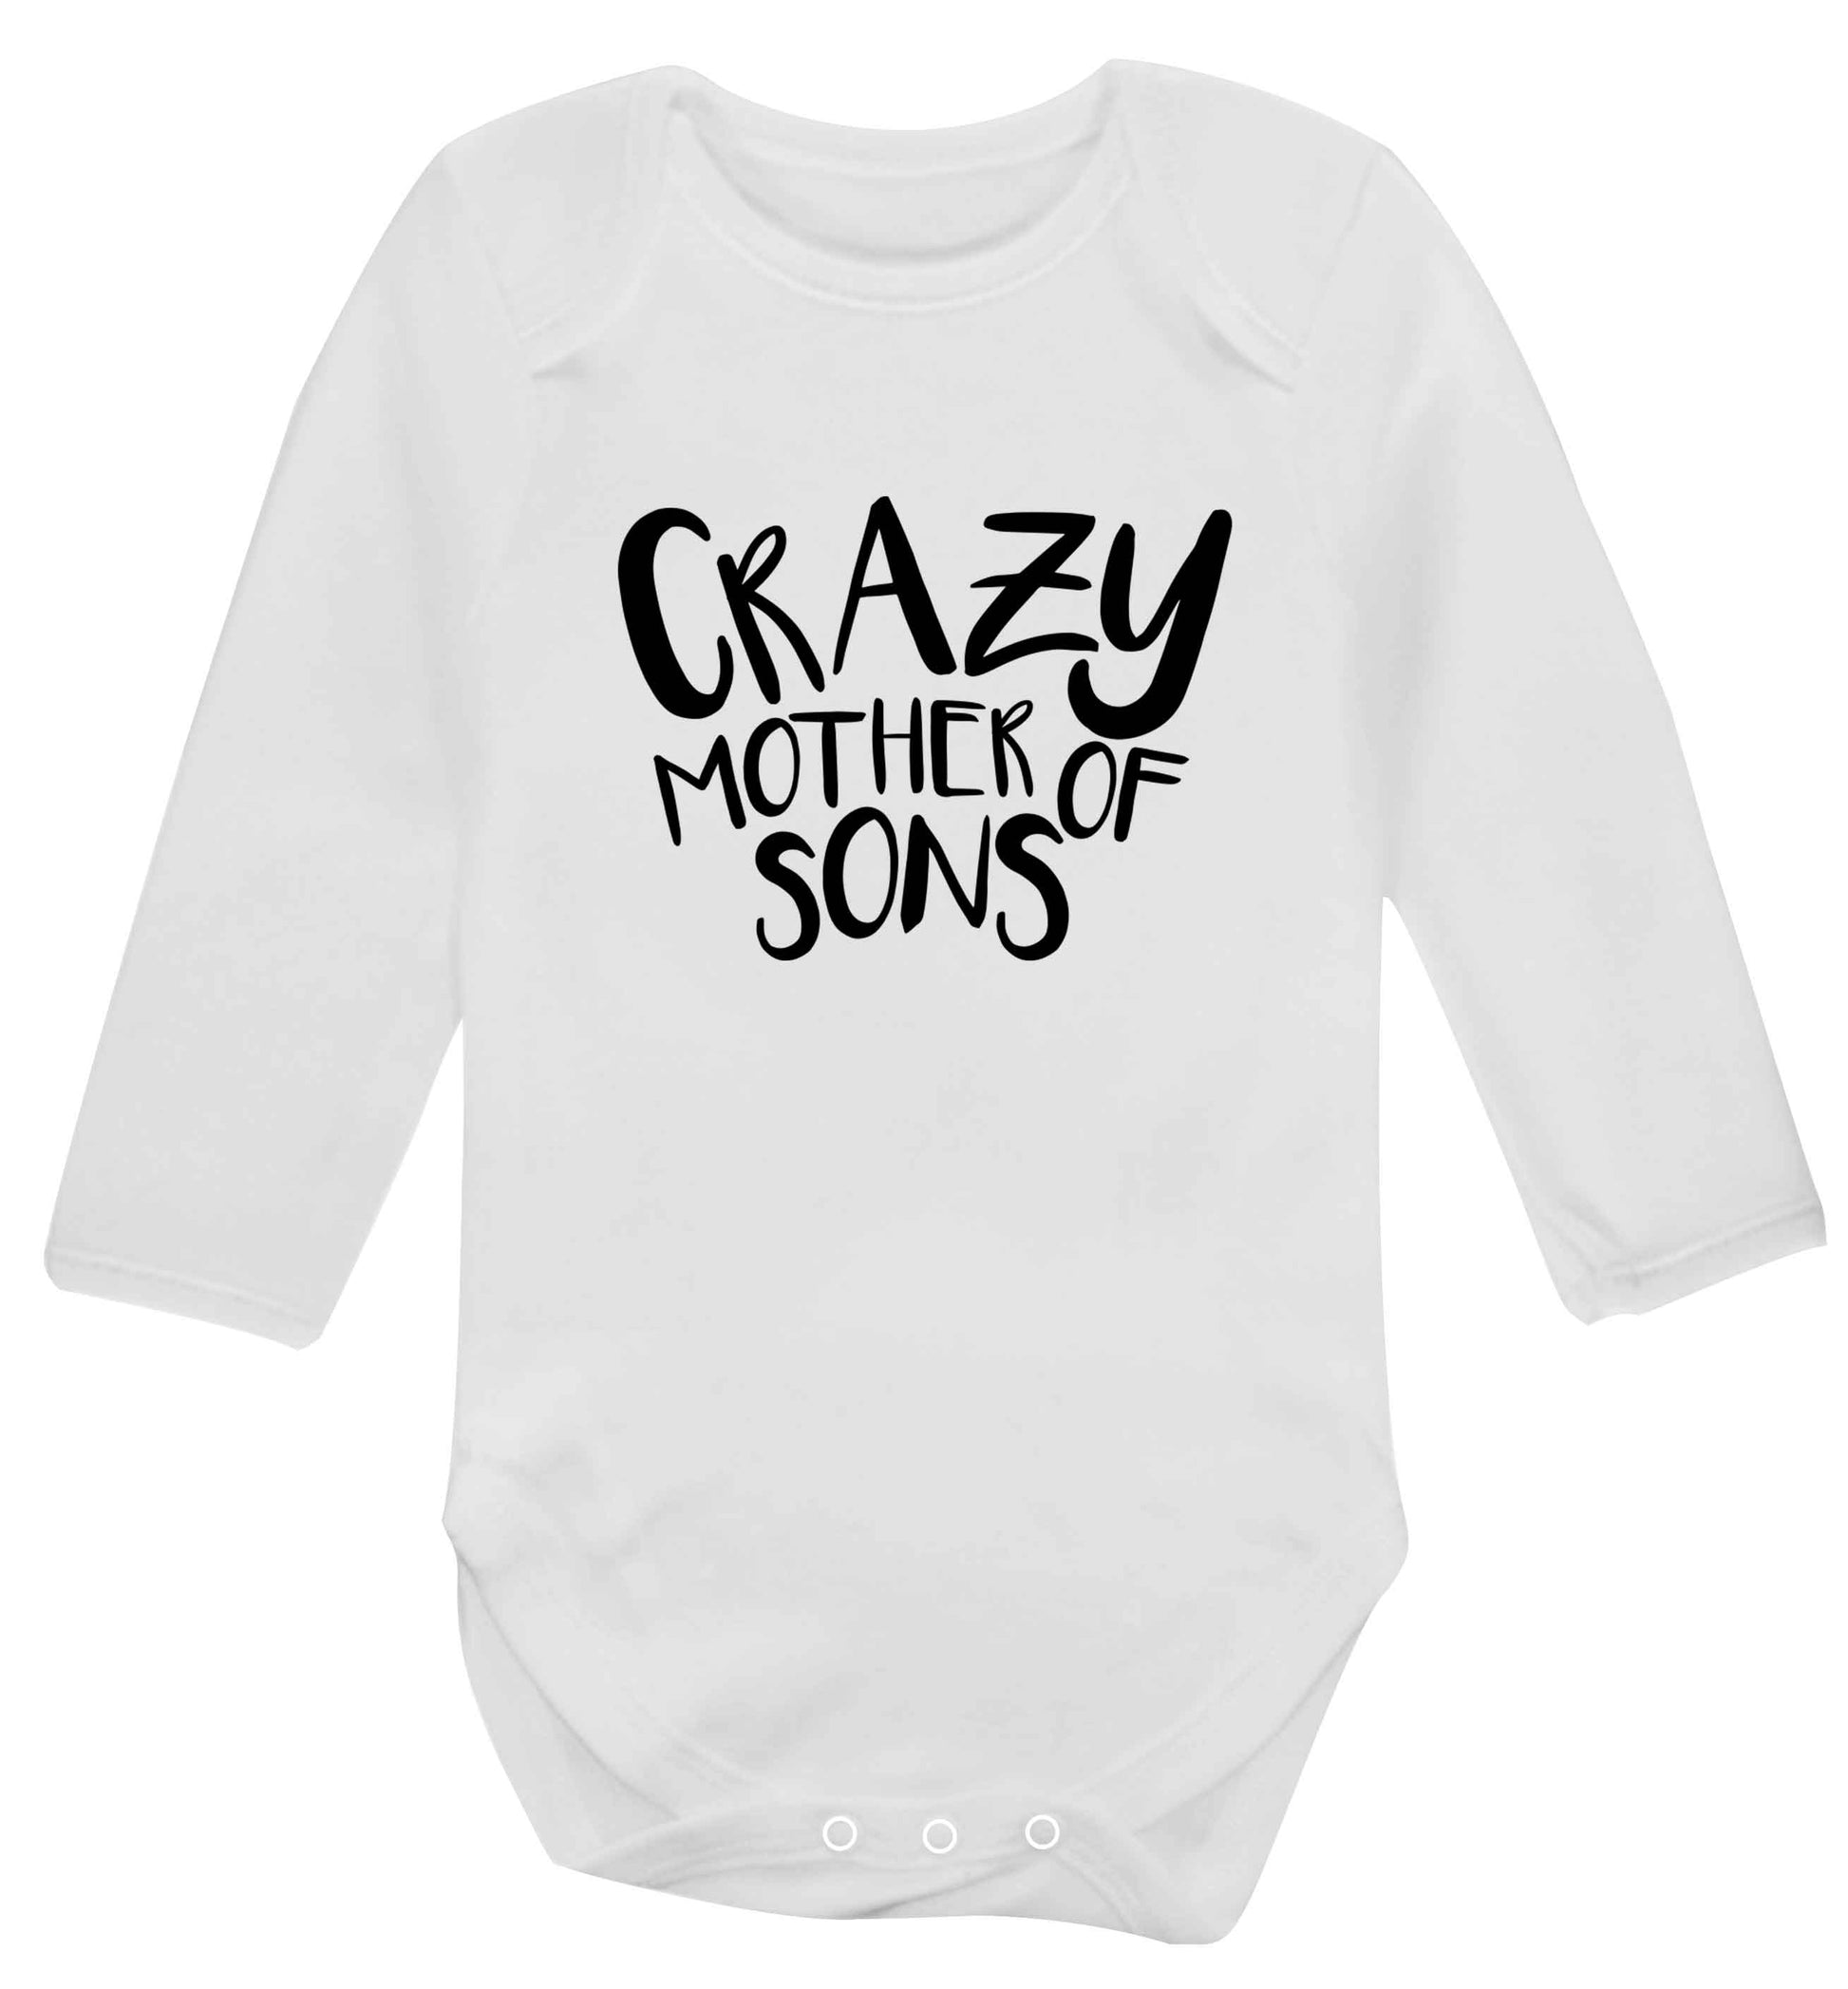 Crazy mother of sons baby vest long sleeved white 6-12 months